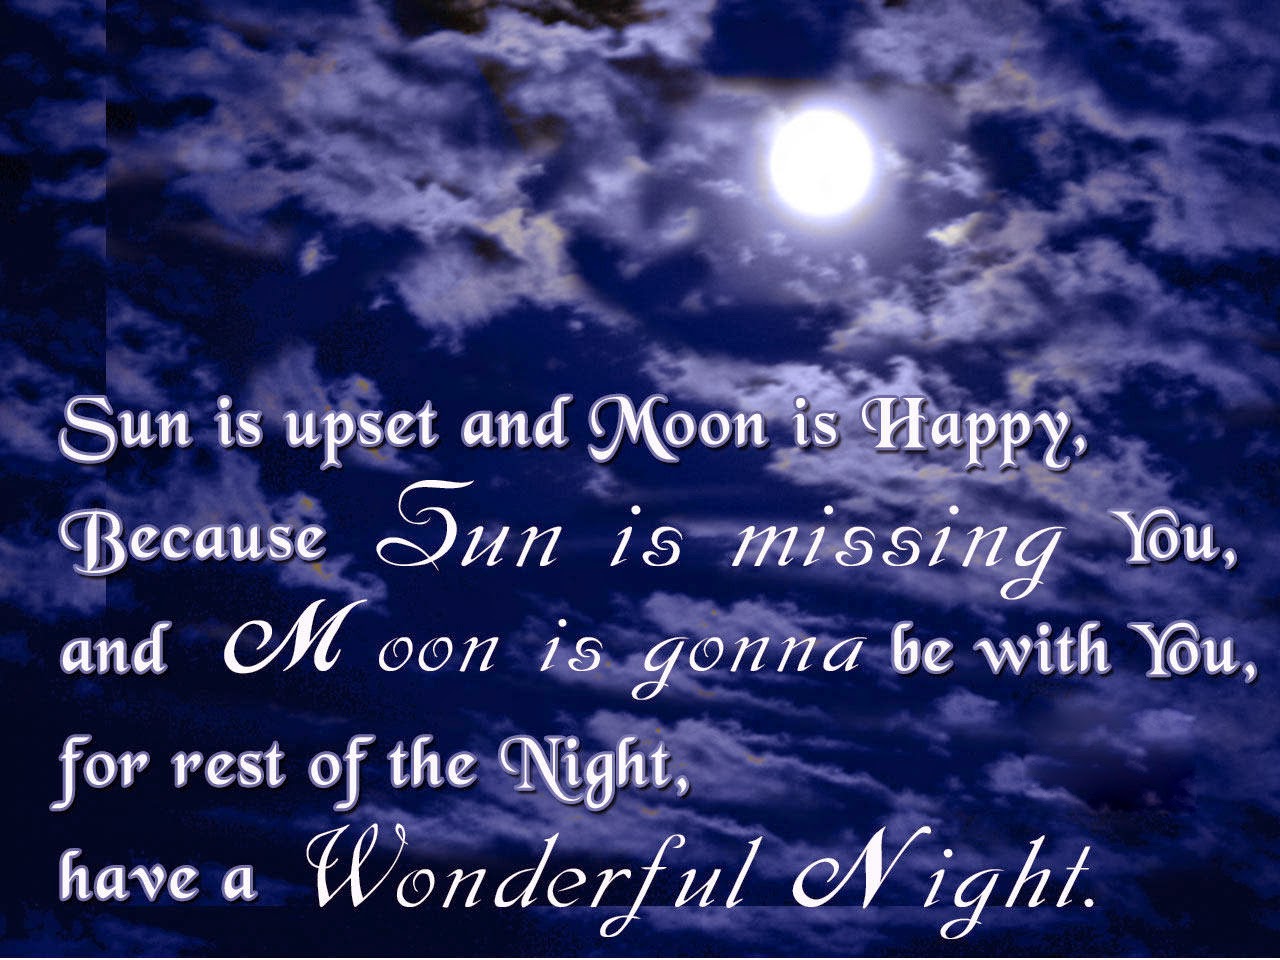 Good night SMS for Lover - SMS to lover with wishes